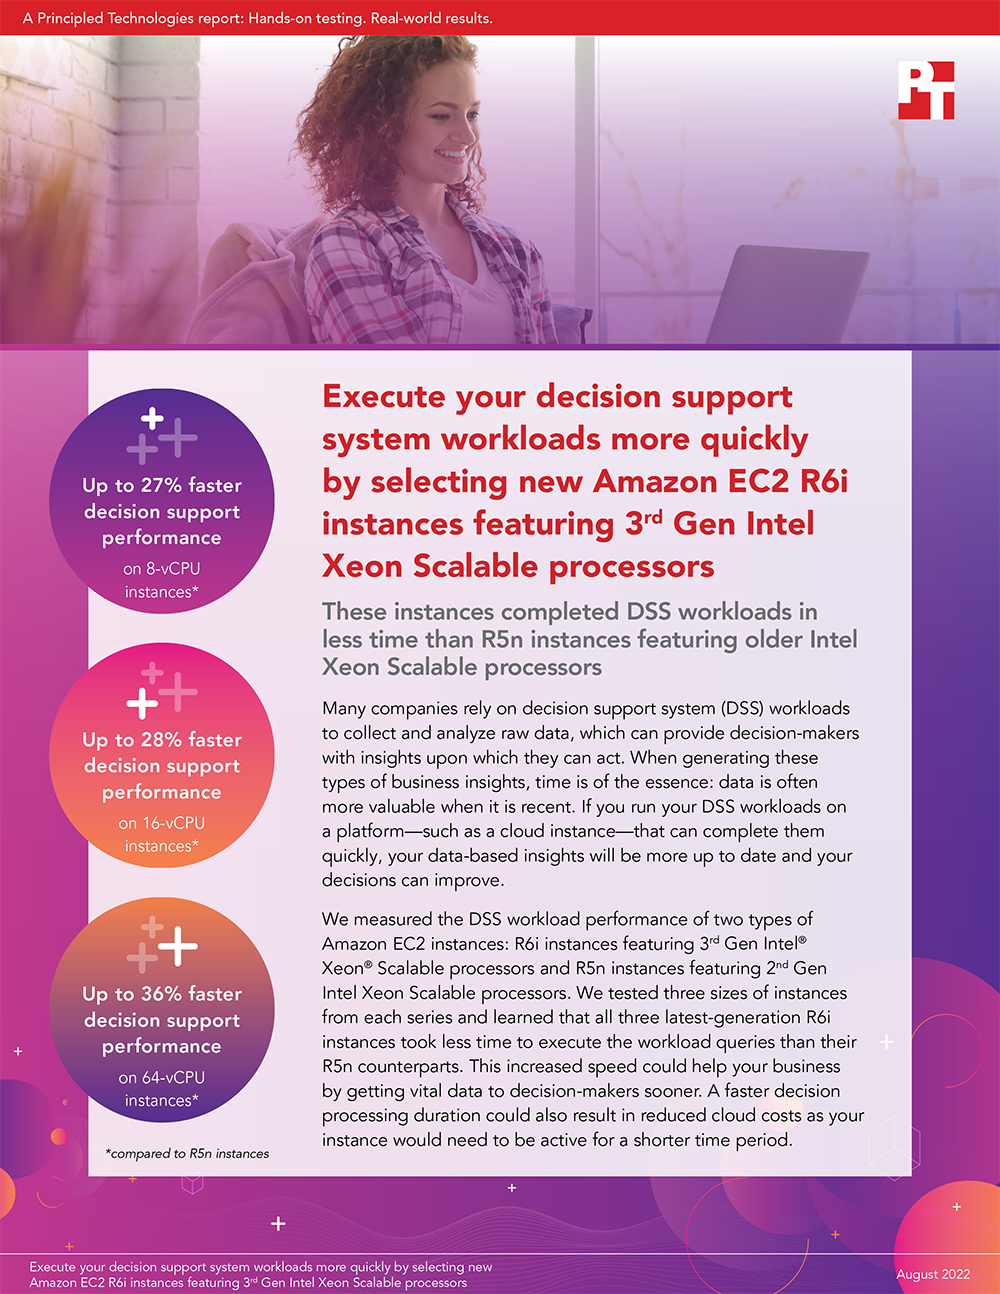 Third-Party Study: Amazon EC2 R6i Instances with 3rd Gen Intel Xeon Scalable Processors Executed DSS Queries Faster Than R5n Instances with Older Intel Processors